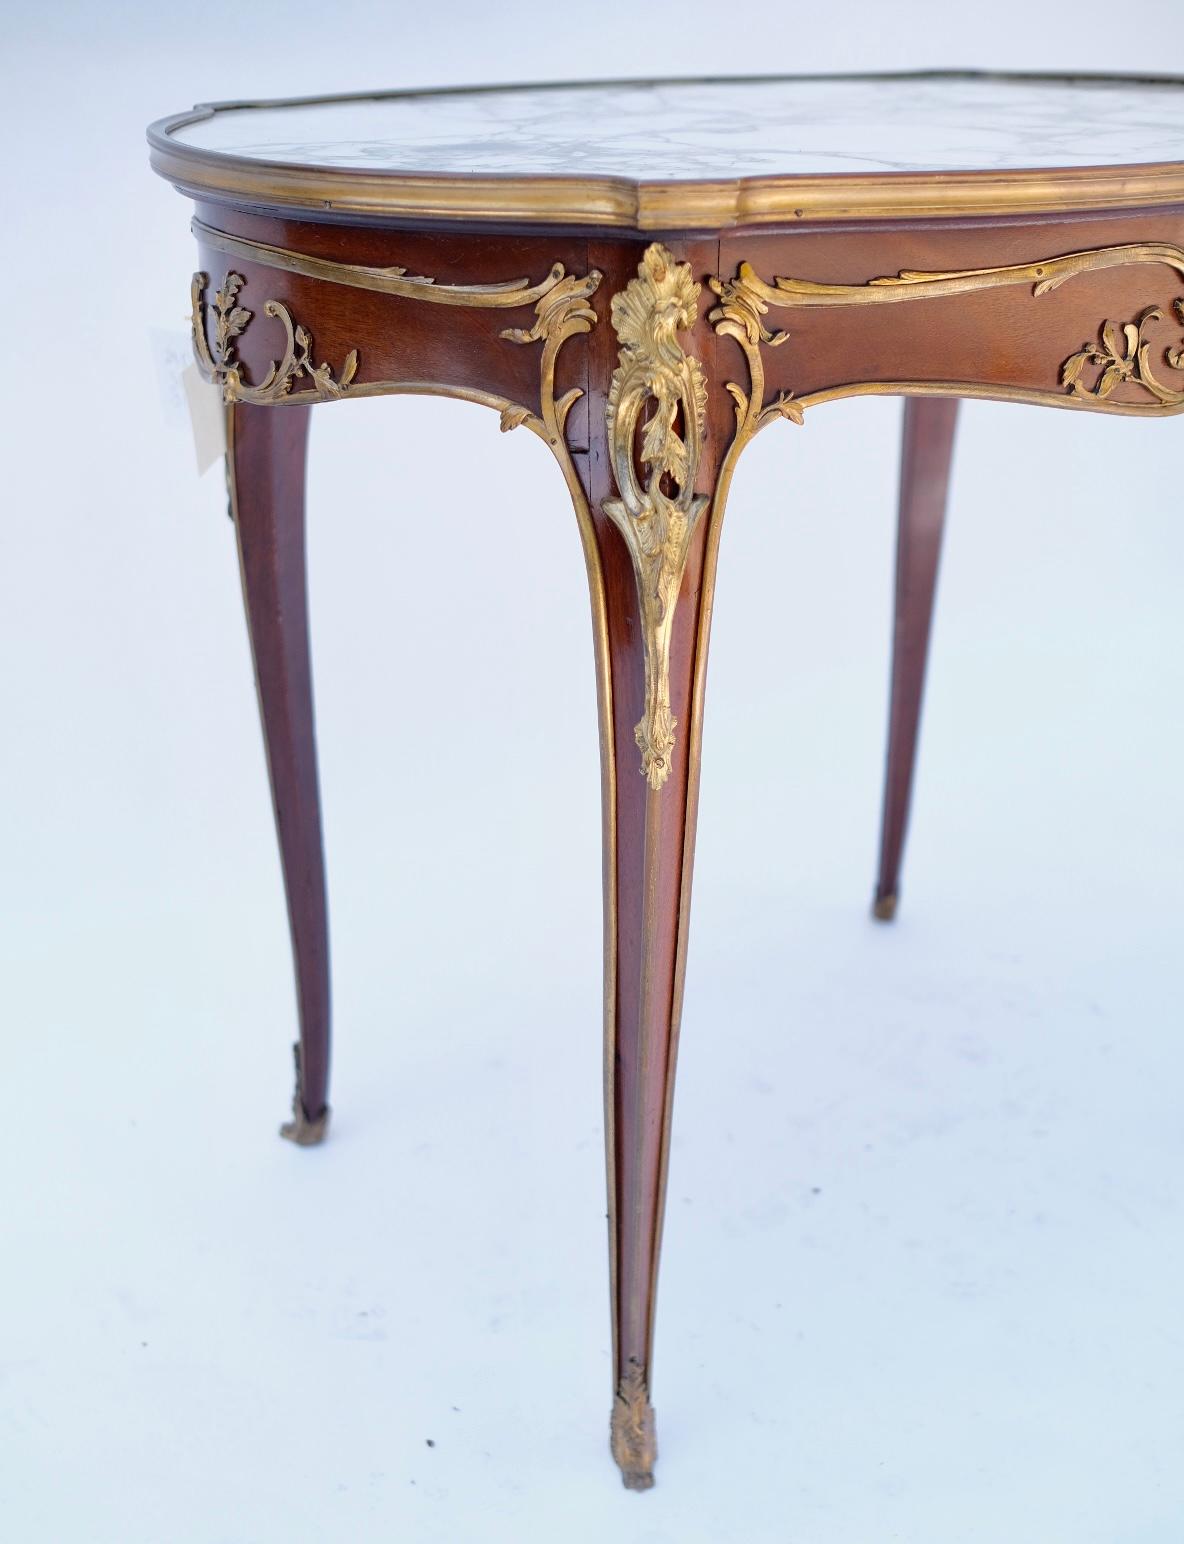 Cast 19th Century French Louis XV Bronze-Mounted Linke Table For Sale